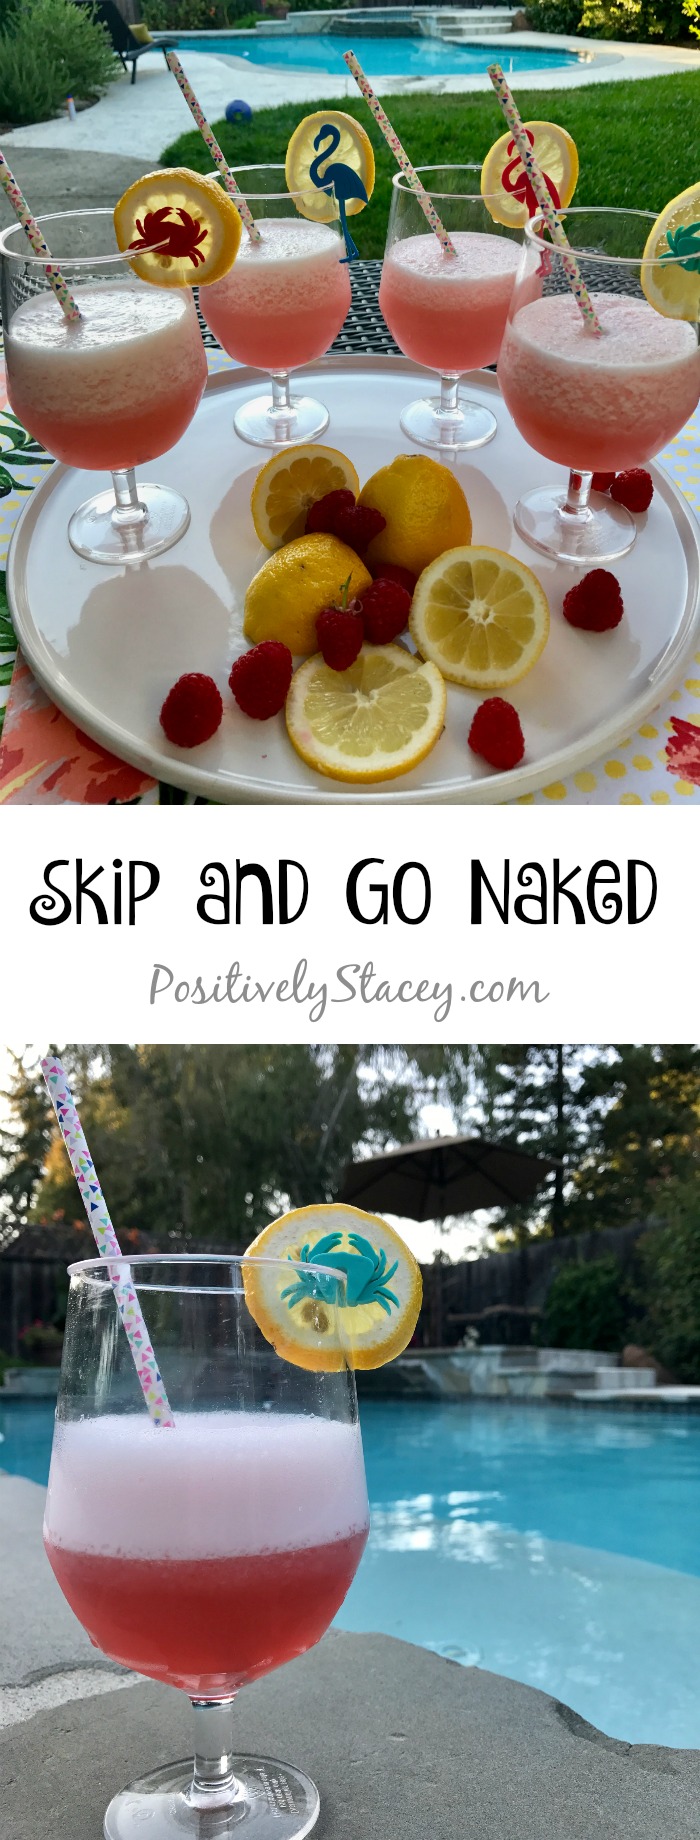 Have you ever had a Skip and Go Naked? This sweet lemony drink is seriously refreshing and the perfect summer cocktail! Enjoy one sitting by the pool.